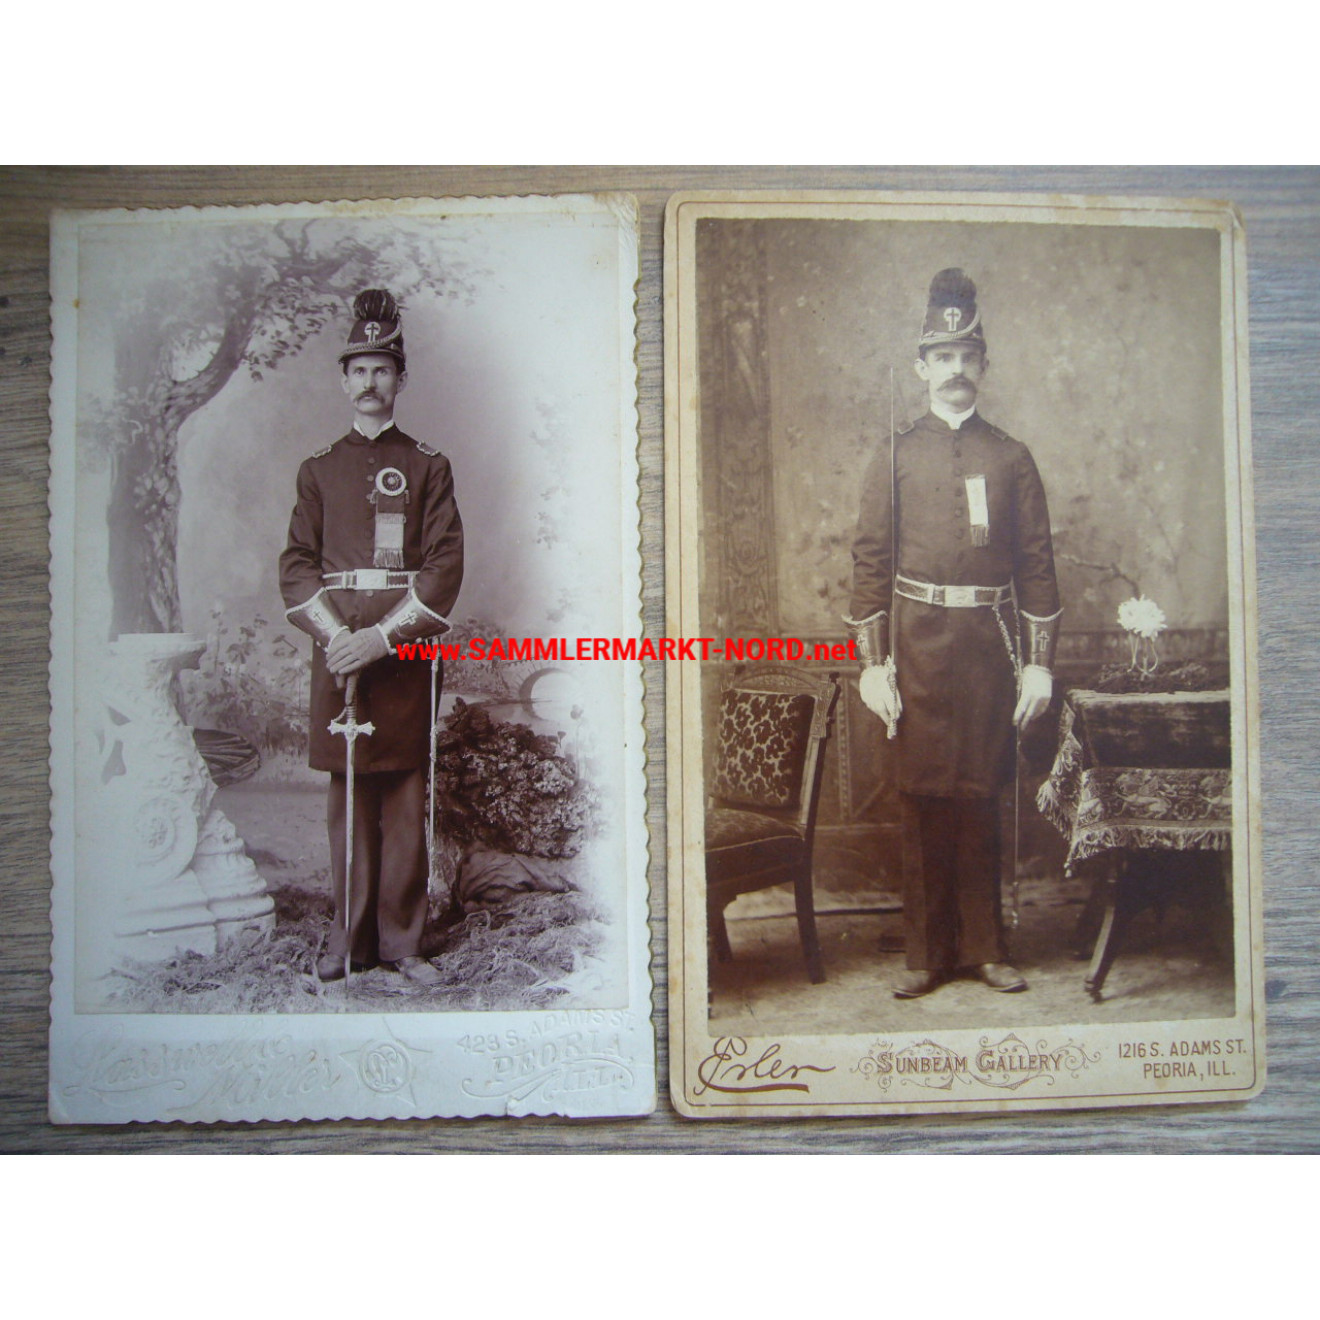 2 x cabinet photo - member of an order of knights (Knights Templar?) - Illinois USA